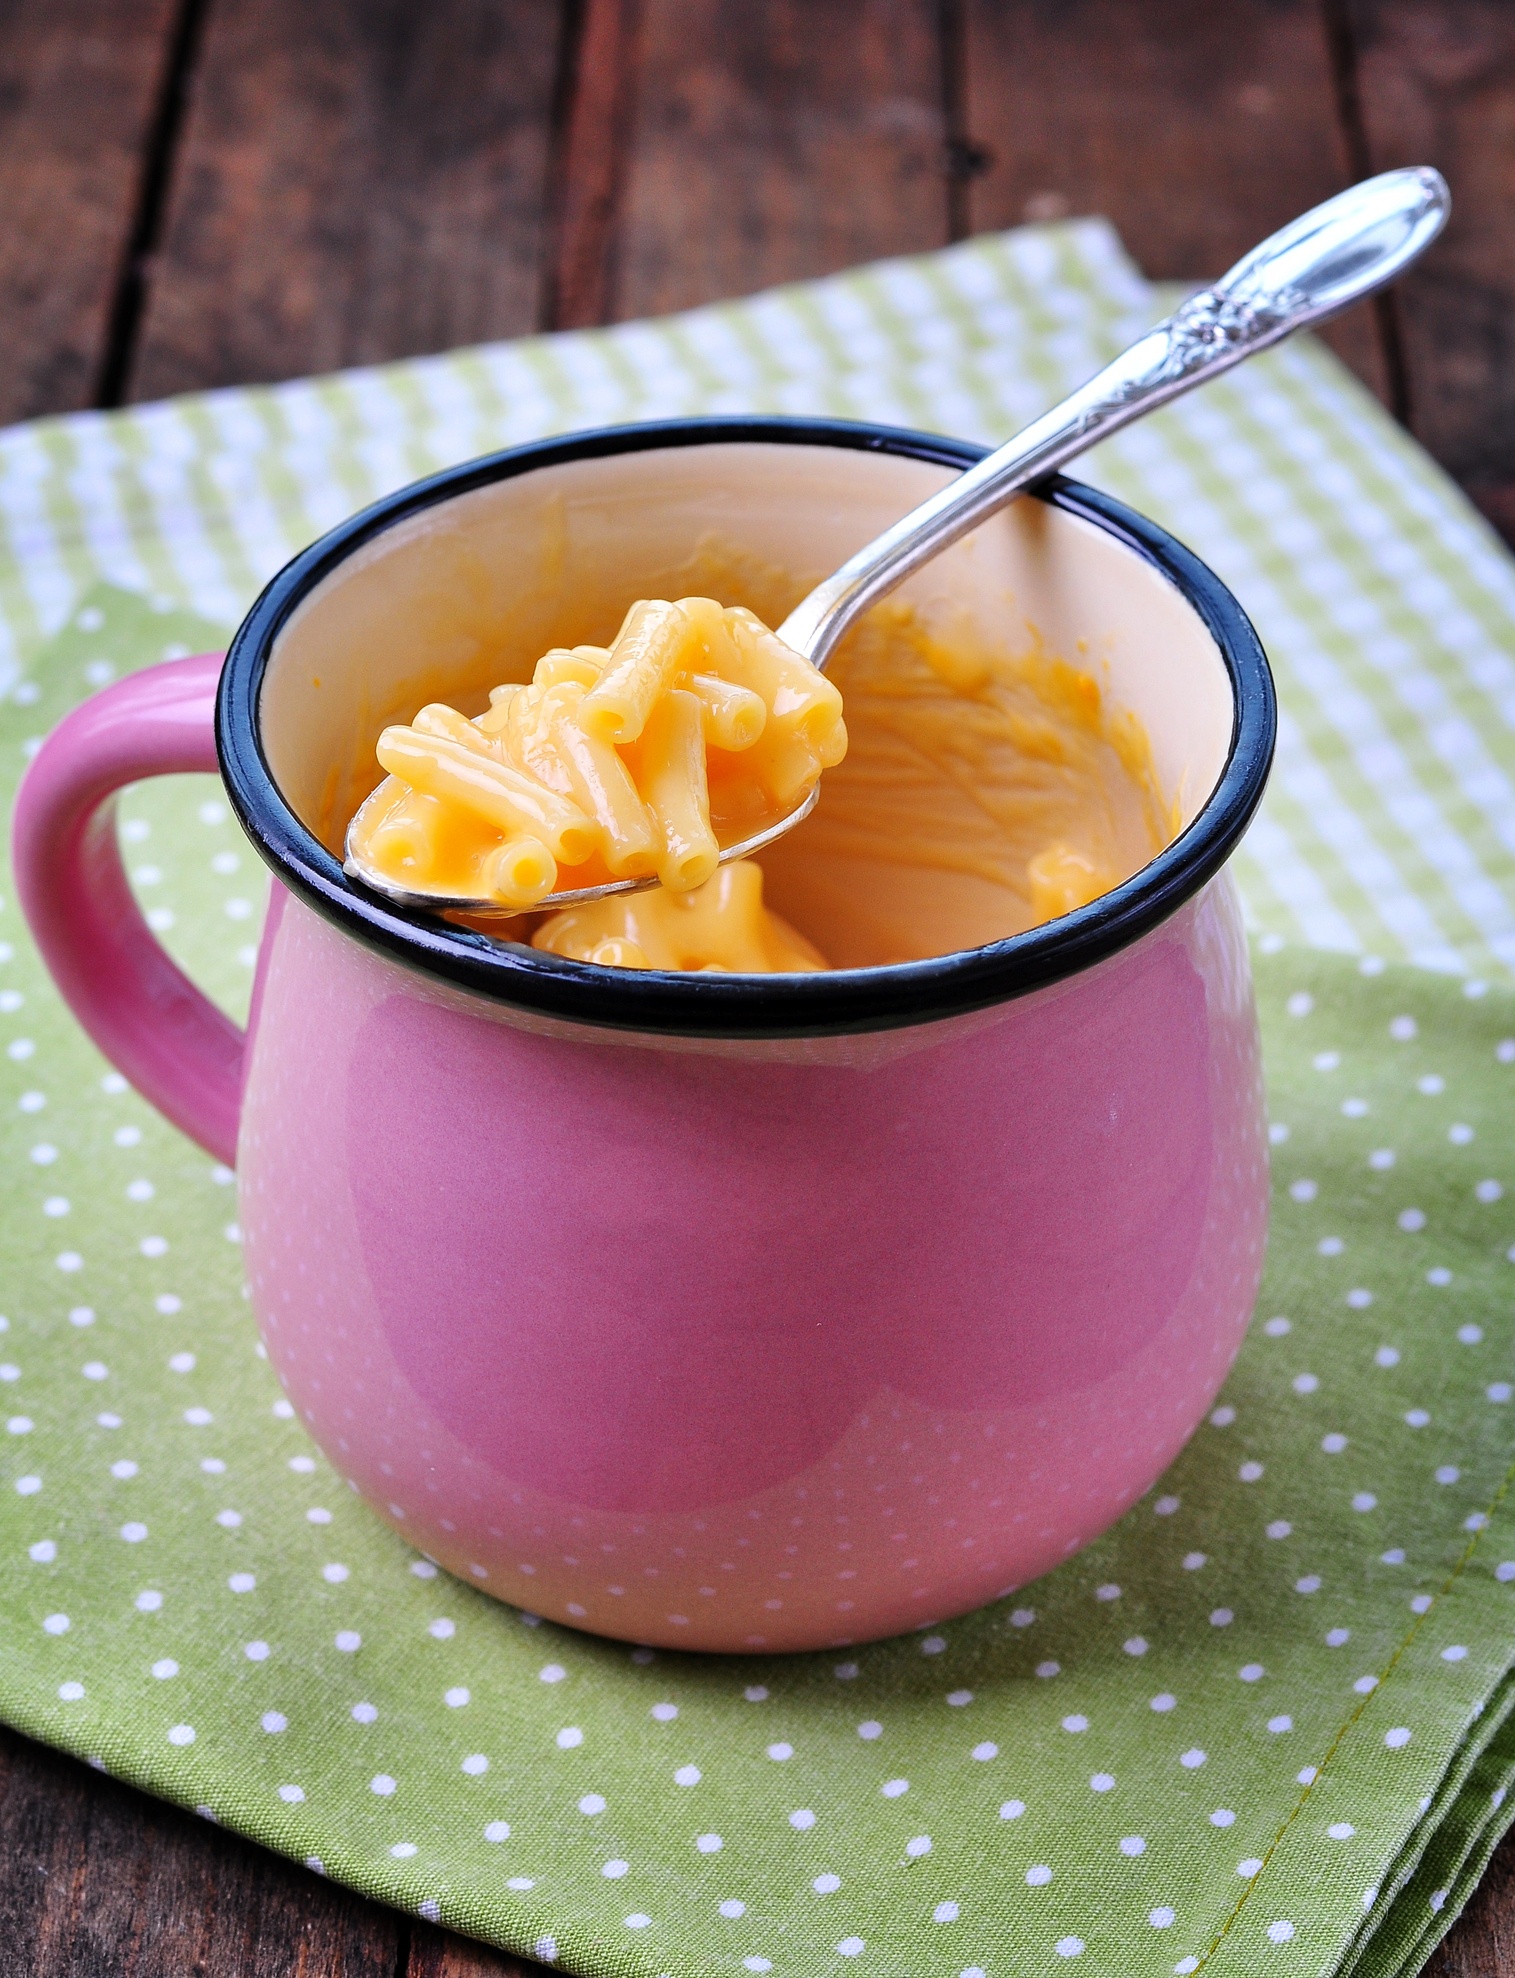 Delicious mug meals. Mac & cheese cooked in the microwave.